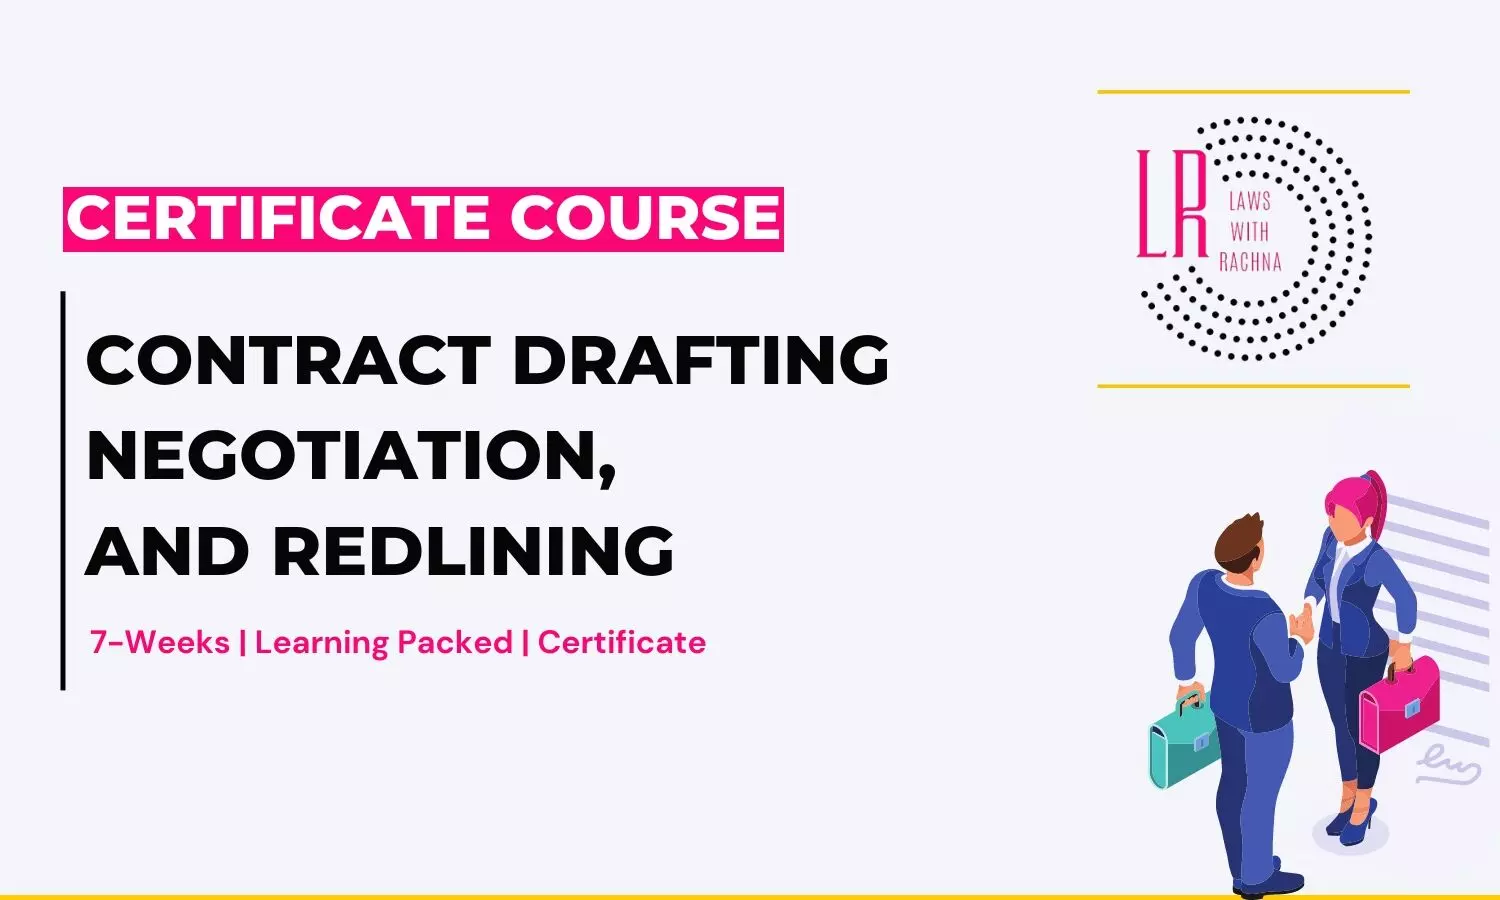 Course on Contract Drafting, Negotiation, and Redlining  LawswithRachna